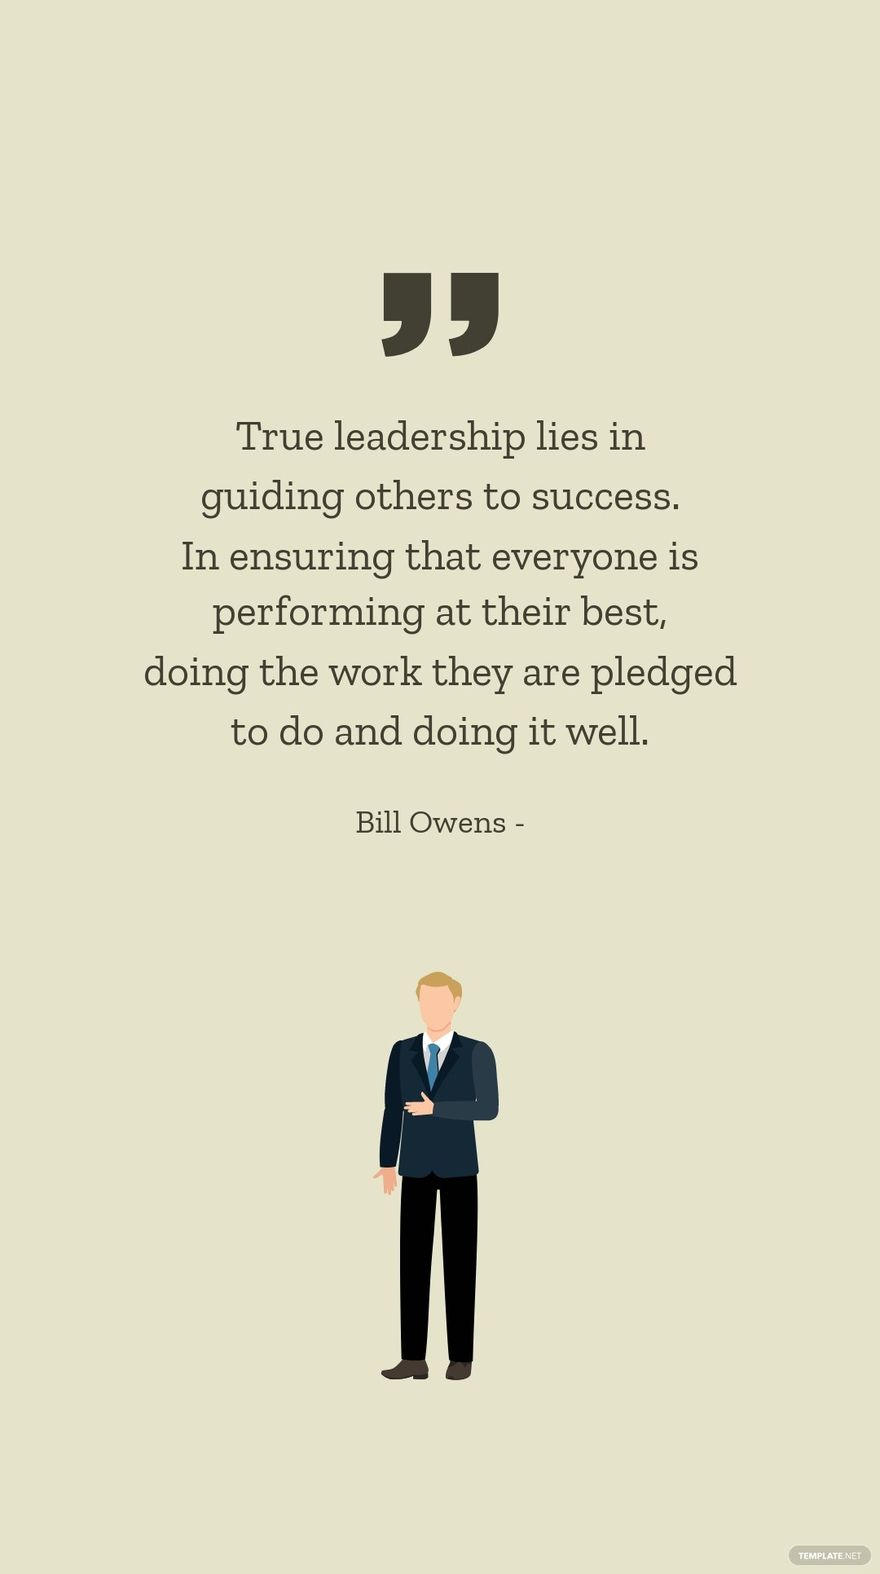 Bill Owens - True leadership lies in guiding others to success. In ensuring that everyone is performing at their best, doing the work they are pledged to do and doing it well.